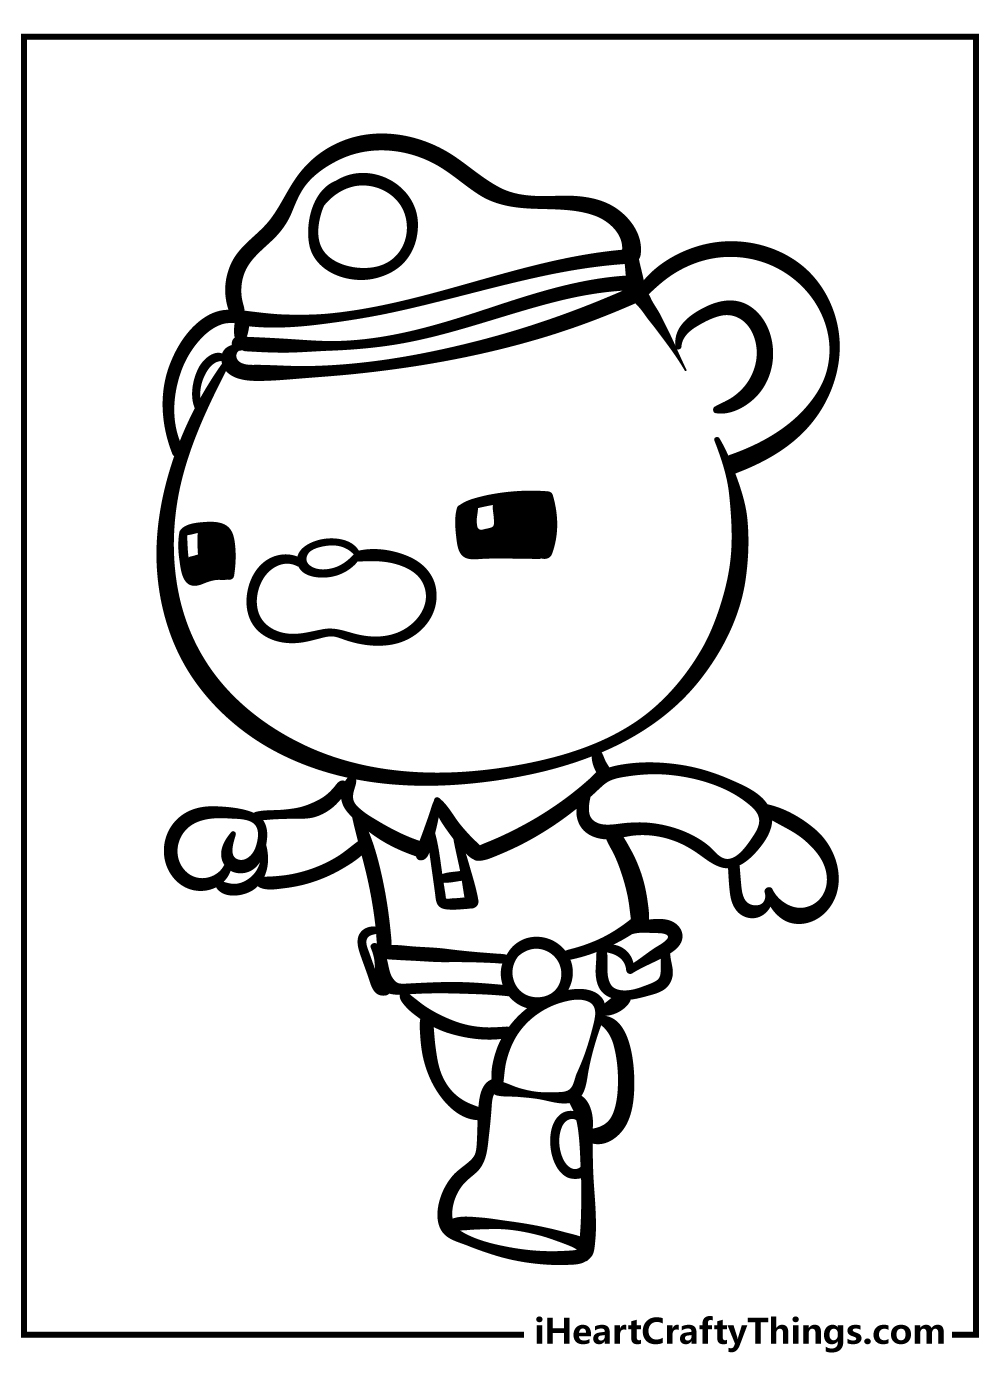 Octonauts Coloring Pages for adults free printable